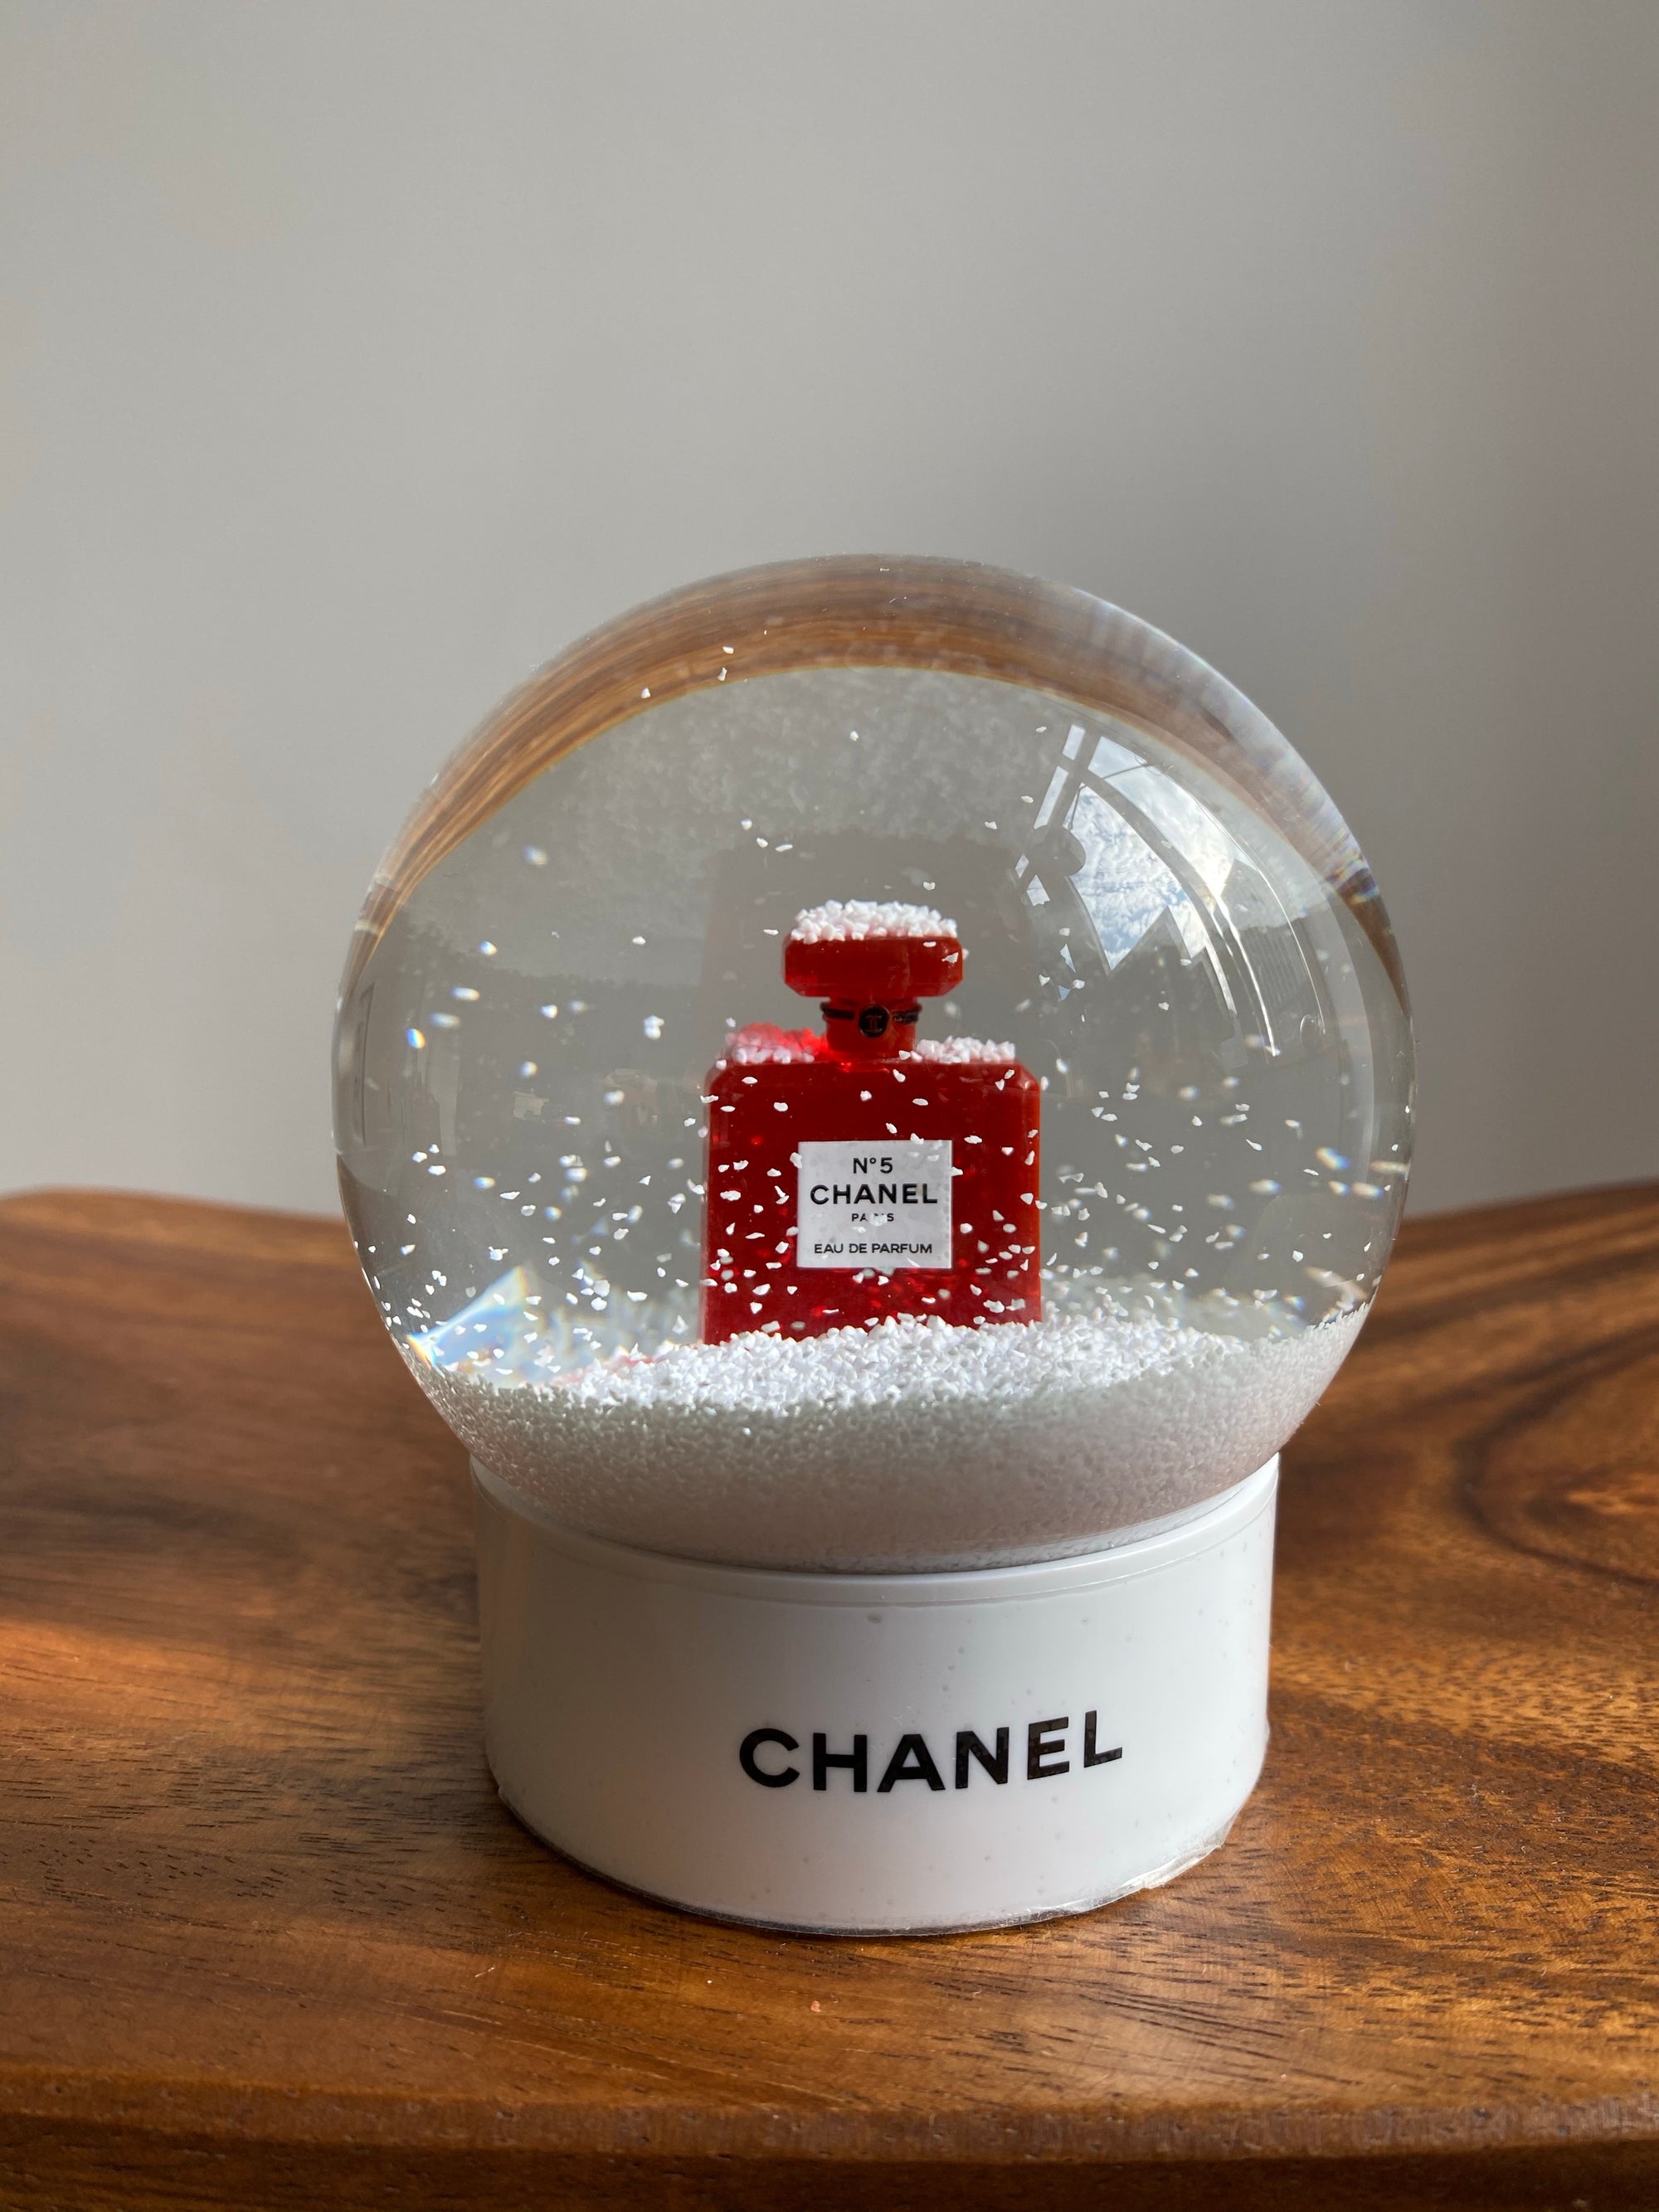 ❗️NEW CHANEL SNOW GLOBE❗️ . This vintage Chanel snow globe has just arrived  from our supplier in France! Only one available, an amazing…